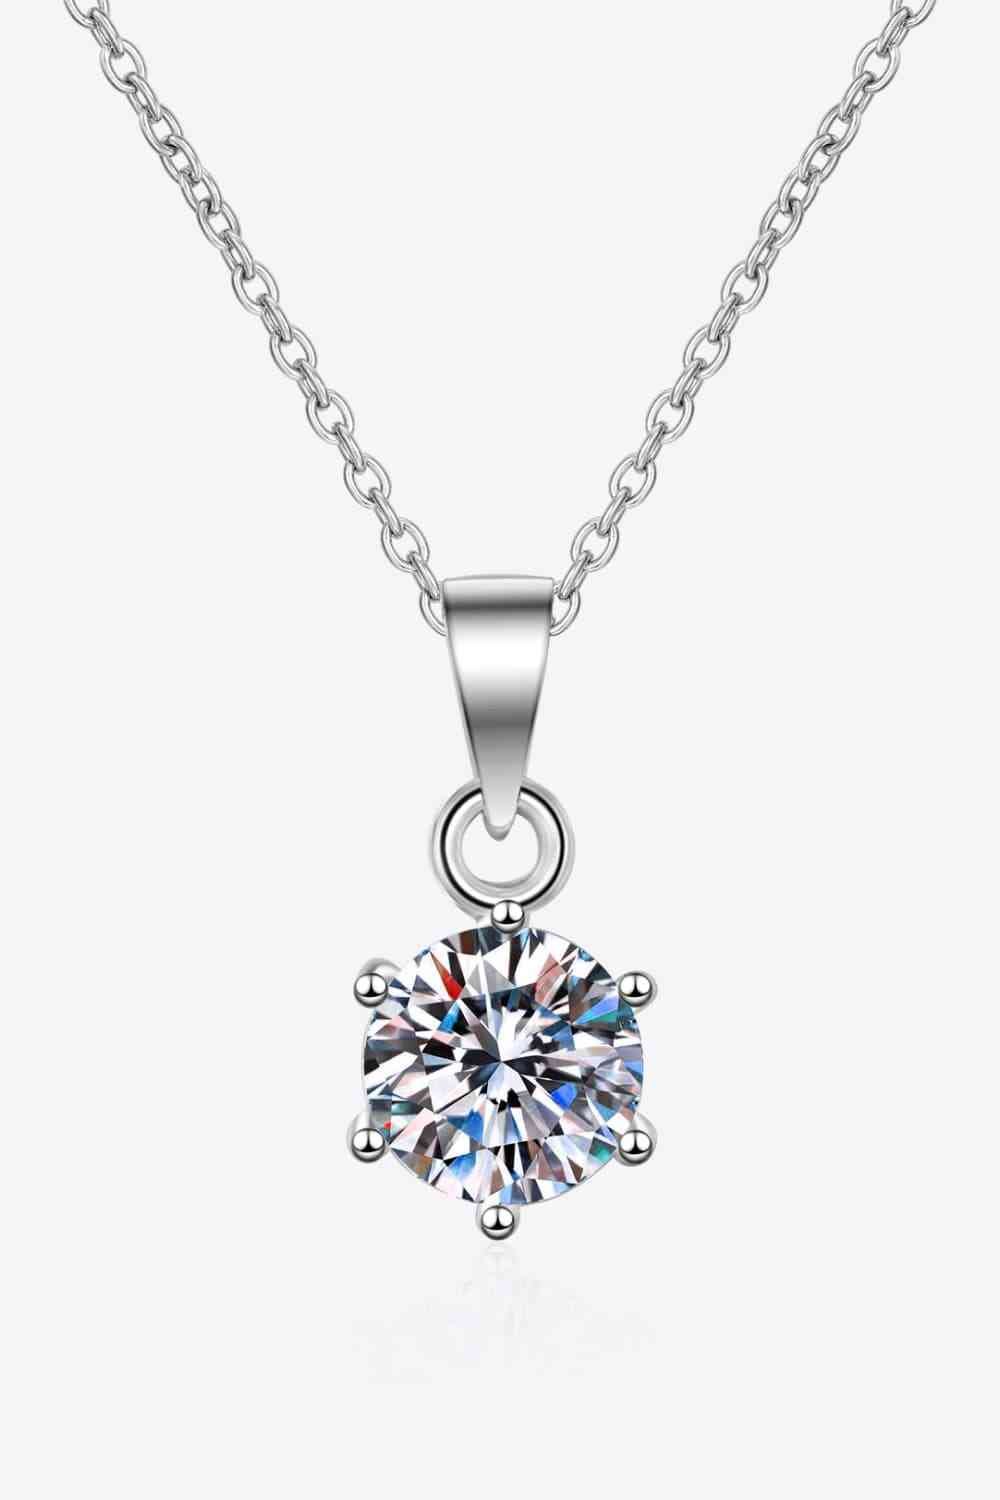 1 Carat Moissanite 925 Sterling Silver Necklace - MyriadMart - christmas